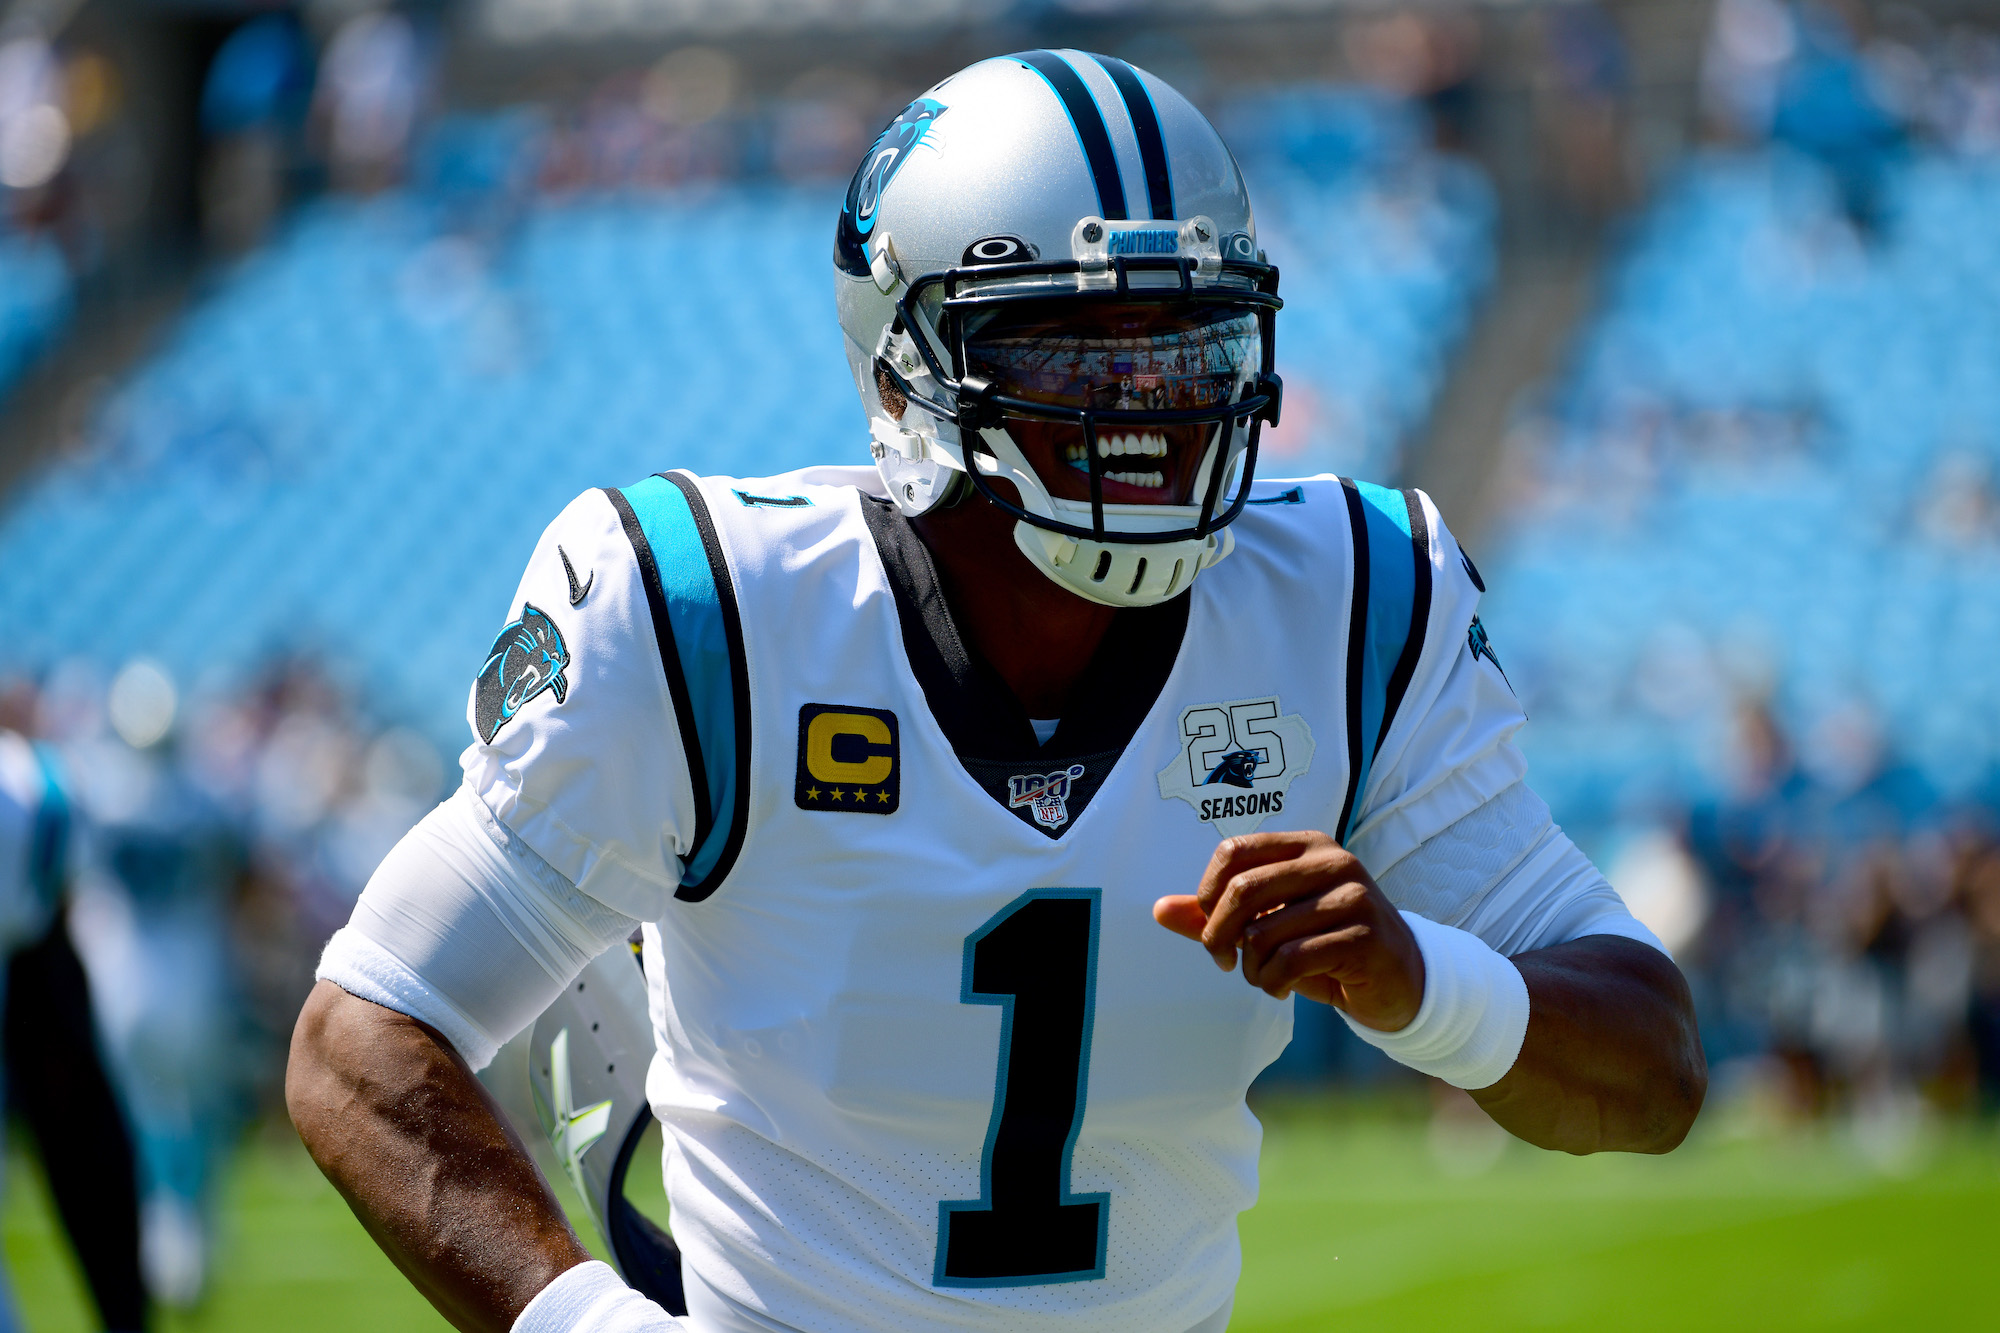 Cam Newton is certainly confident, but all the positivity in the world can't overcome injury issues.